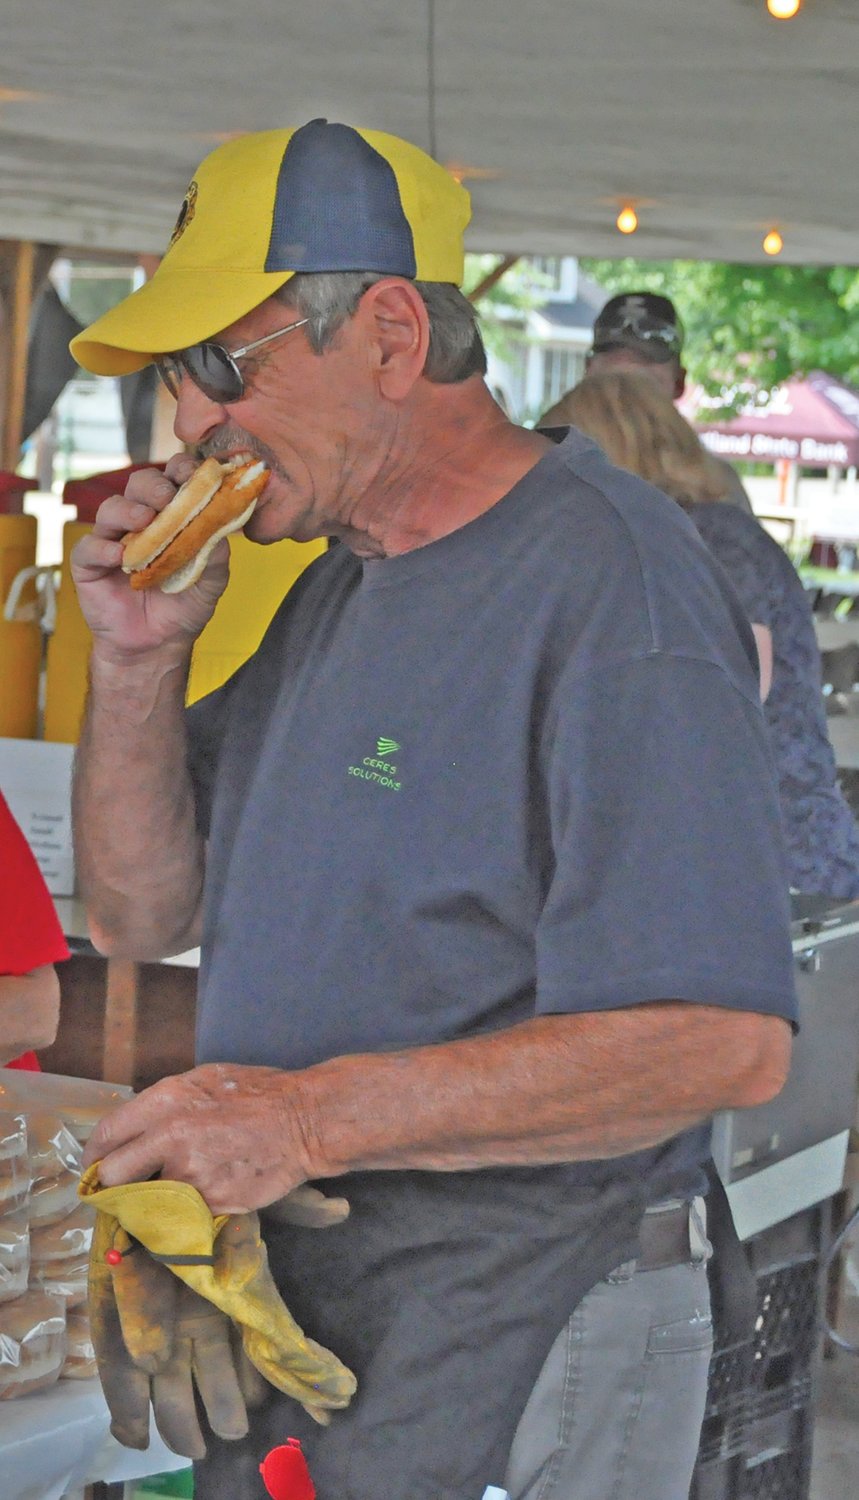 EJ Dixon taste tests a fish sandwich at the Ladoga Lions Club Fish Fry on Friday. The 81st annual event featured live music, fireworks, carnival rides and vendor booths.